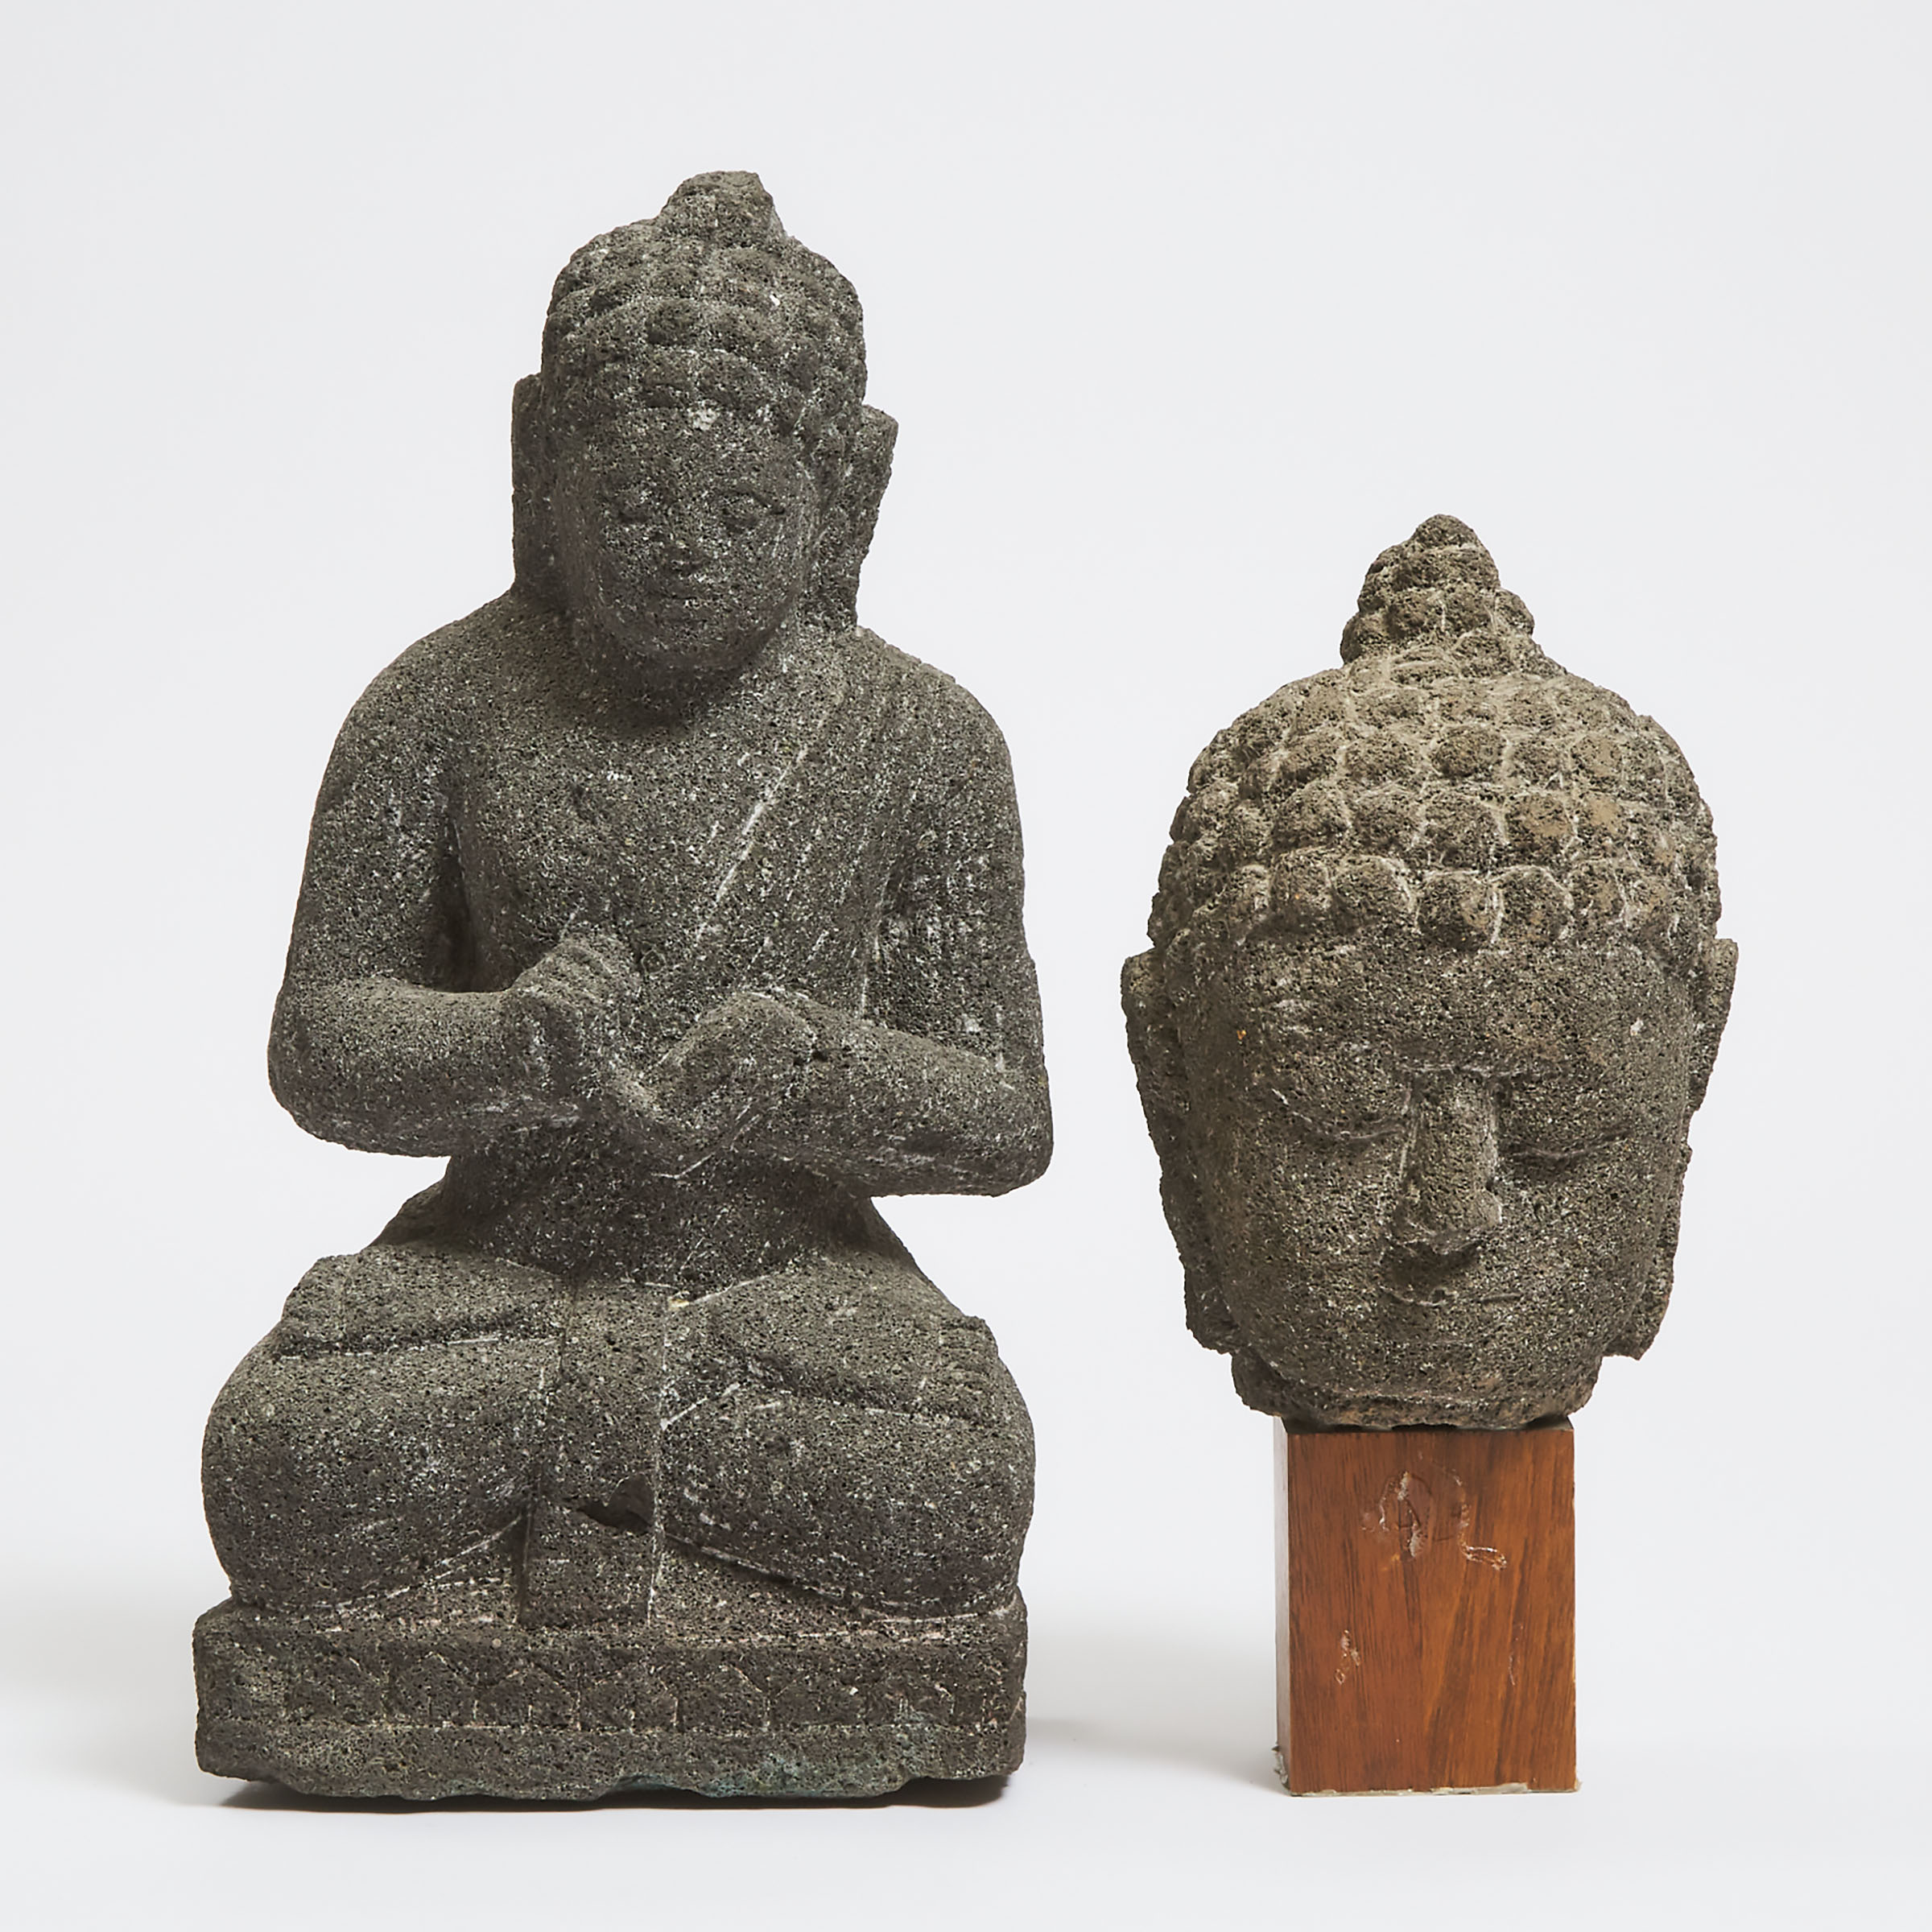 Two Javanese Volcanic Stone Carvings